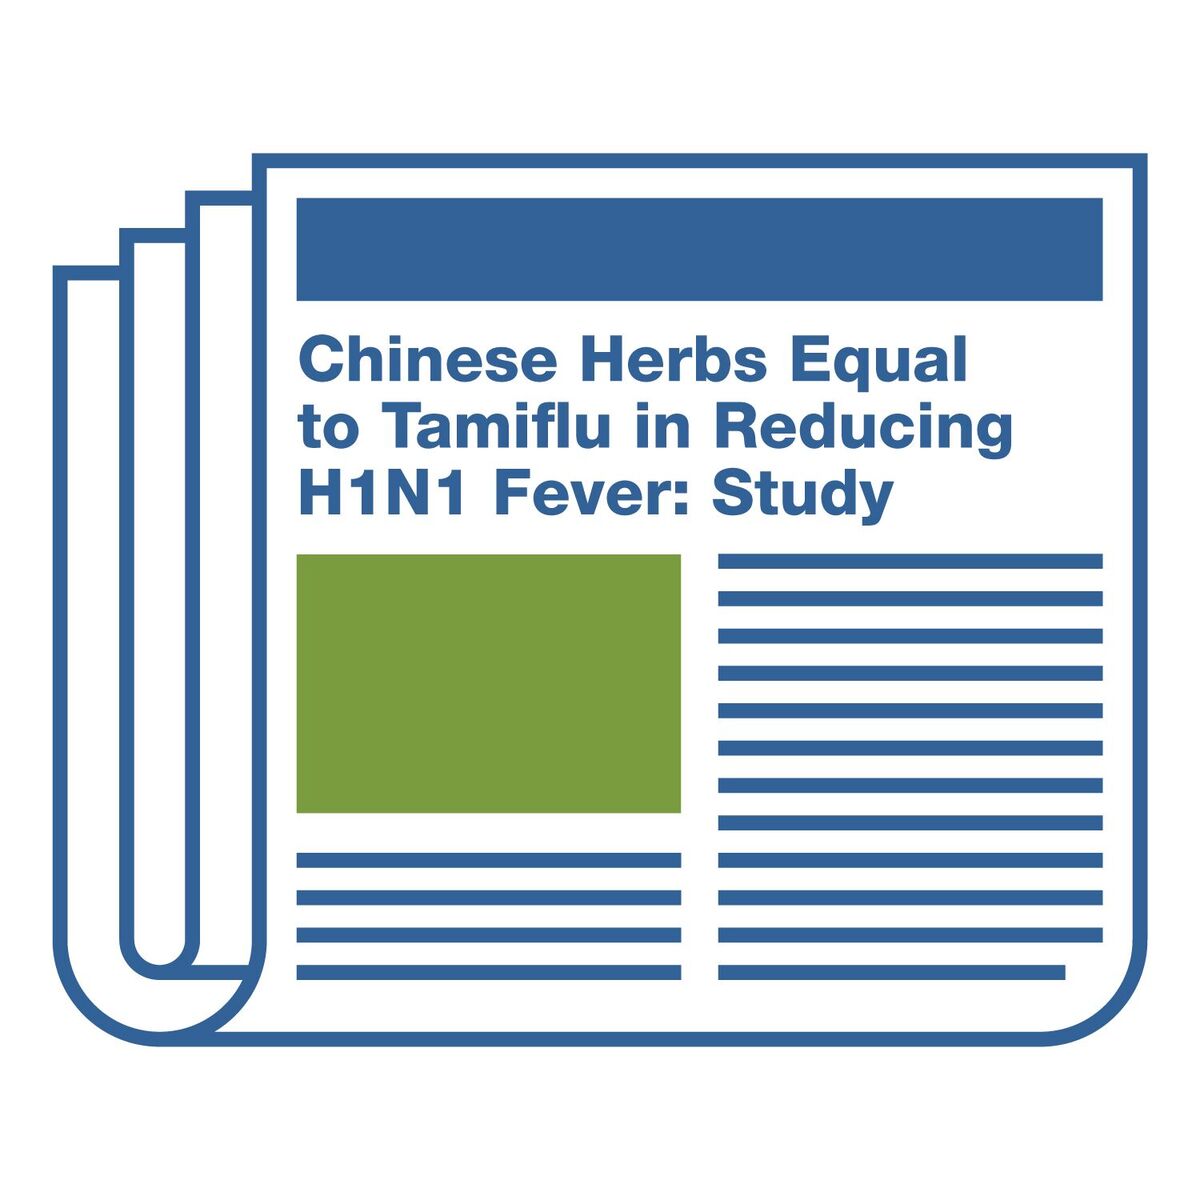 Headline: Chinese herbs equal to Tamiflu in Reducing H1N1 fever: study